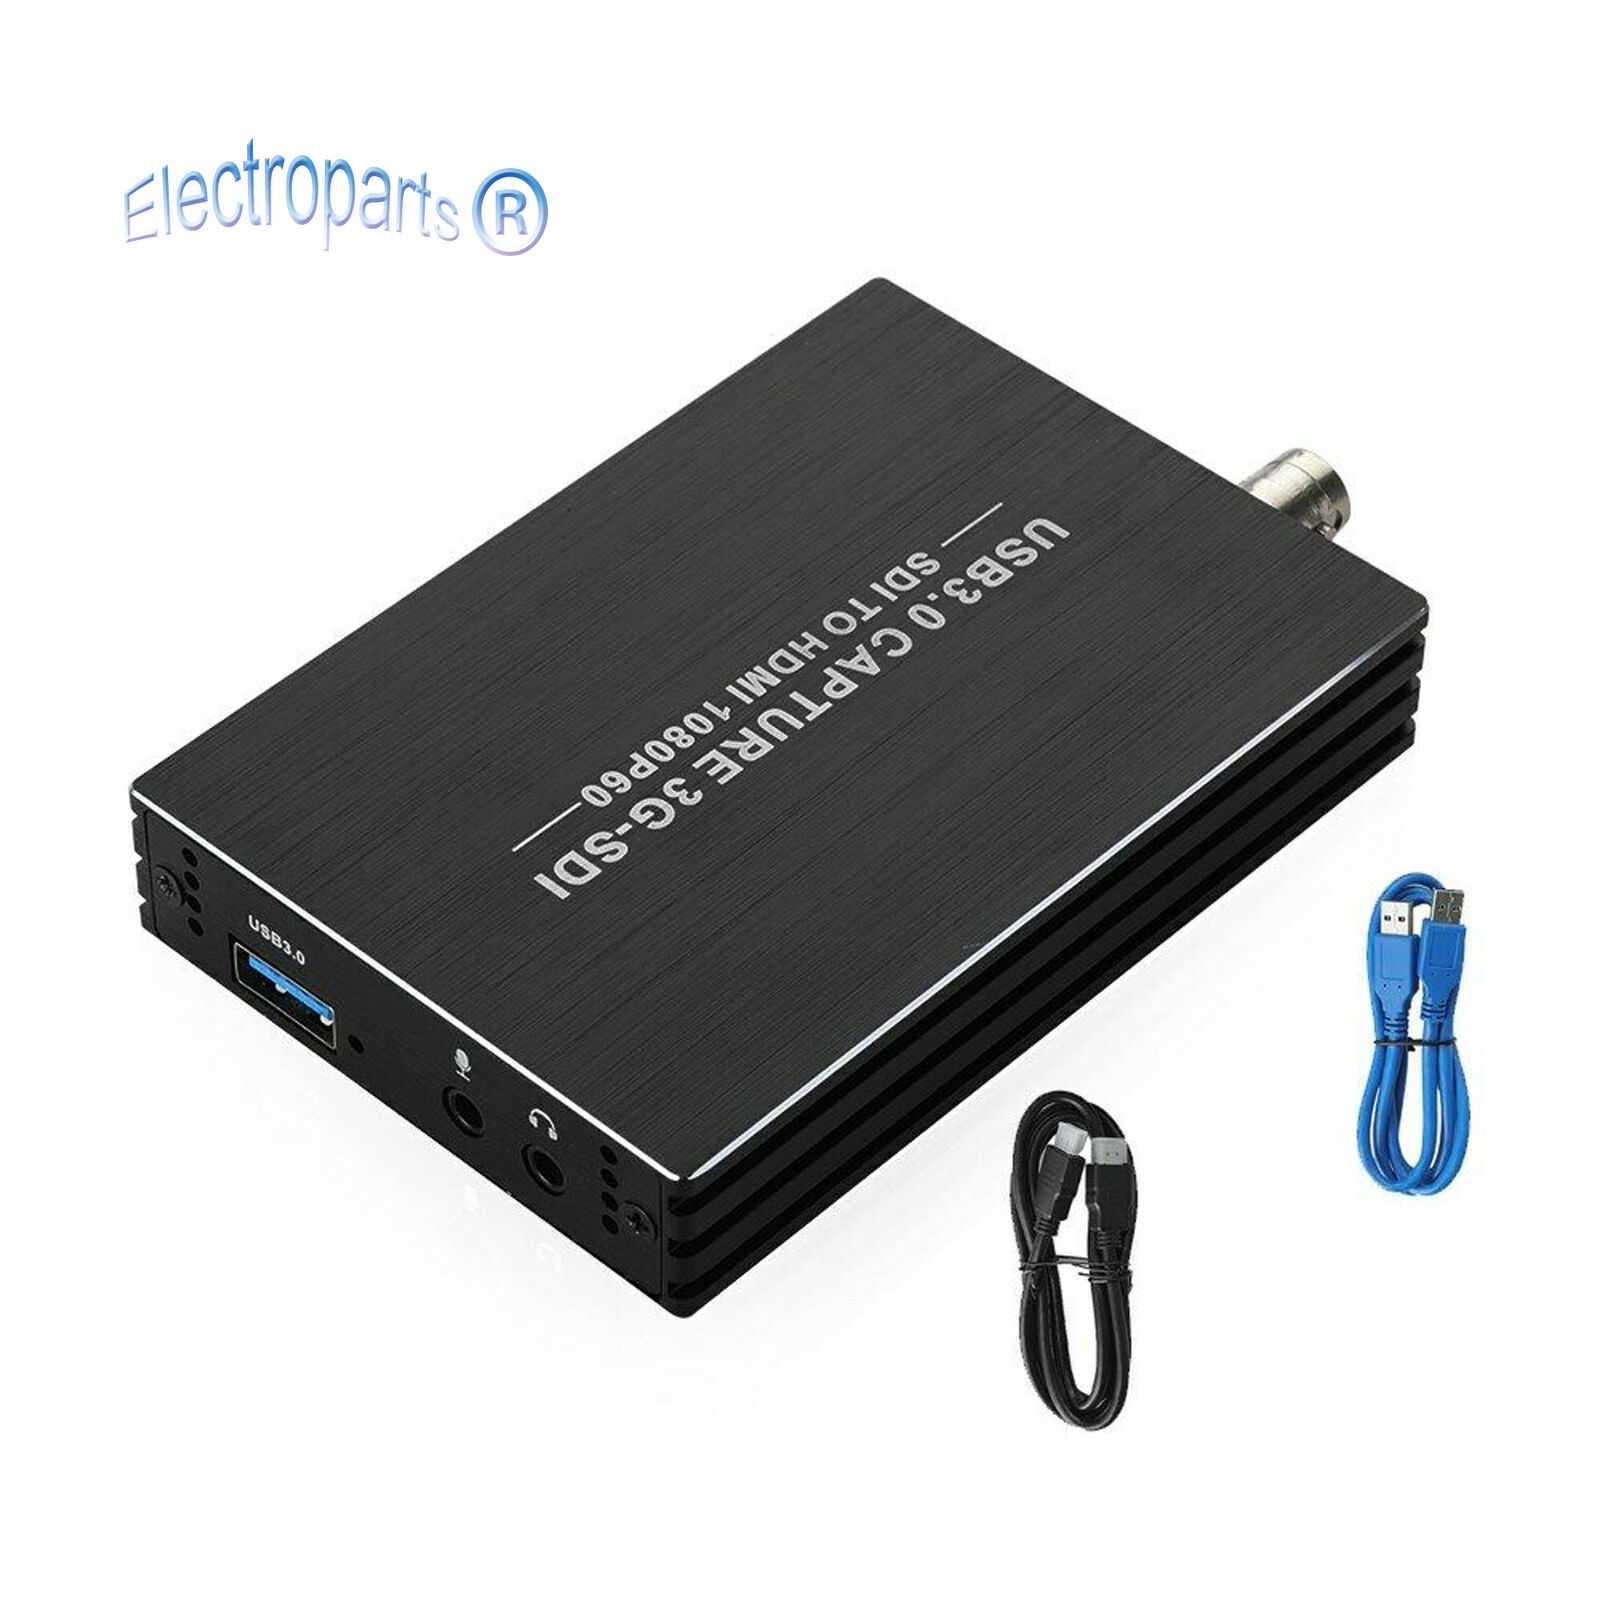 SDI to USB3.0 Video Capture Card 1080P 60FPS Video Record with HDMI Out+Mic In